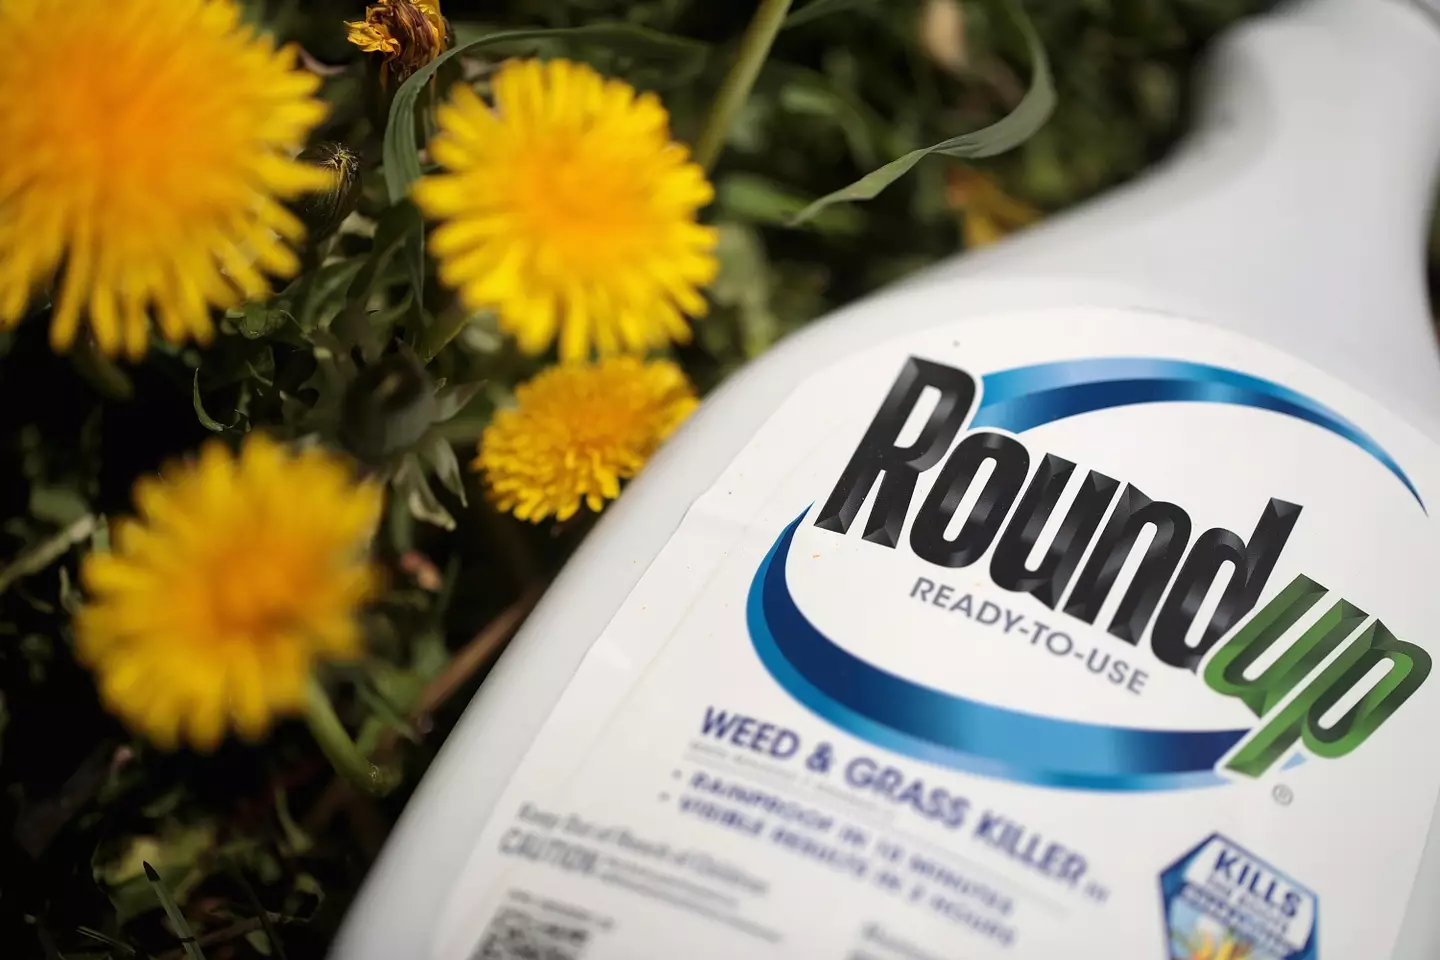 Thousands of people have claimed that Roundup caused them to develop cancer.